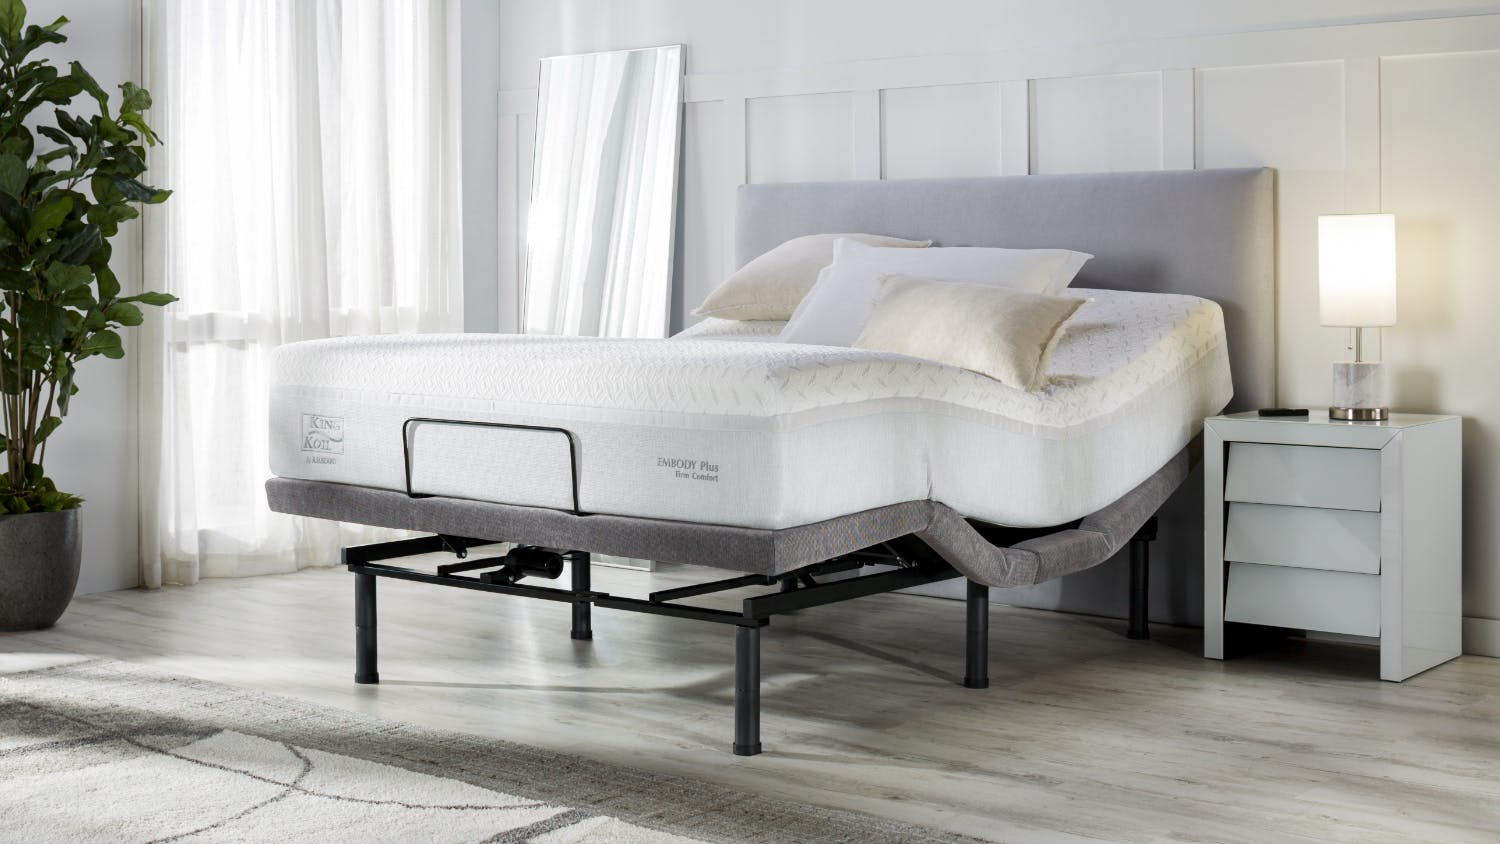 King Coil Embody Plus Firm Queen Mattress with Renew Zero Clearance Dark Grey Adjustable Base by A.H Beard